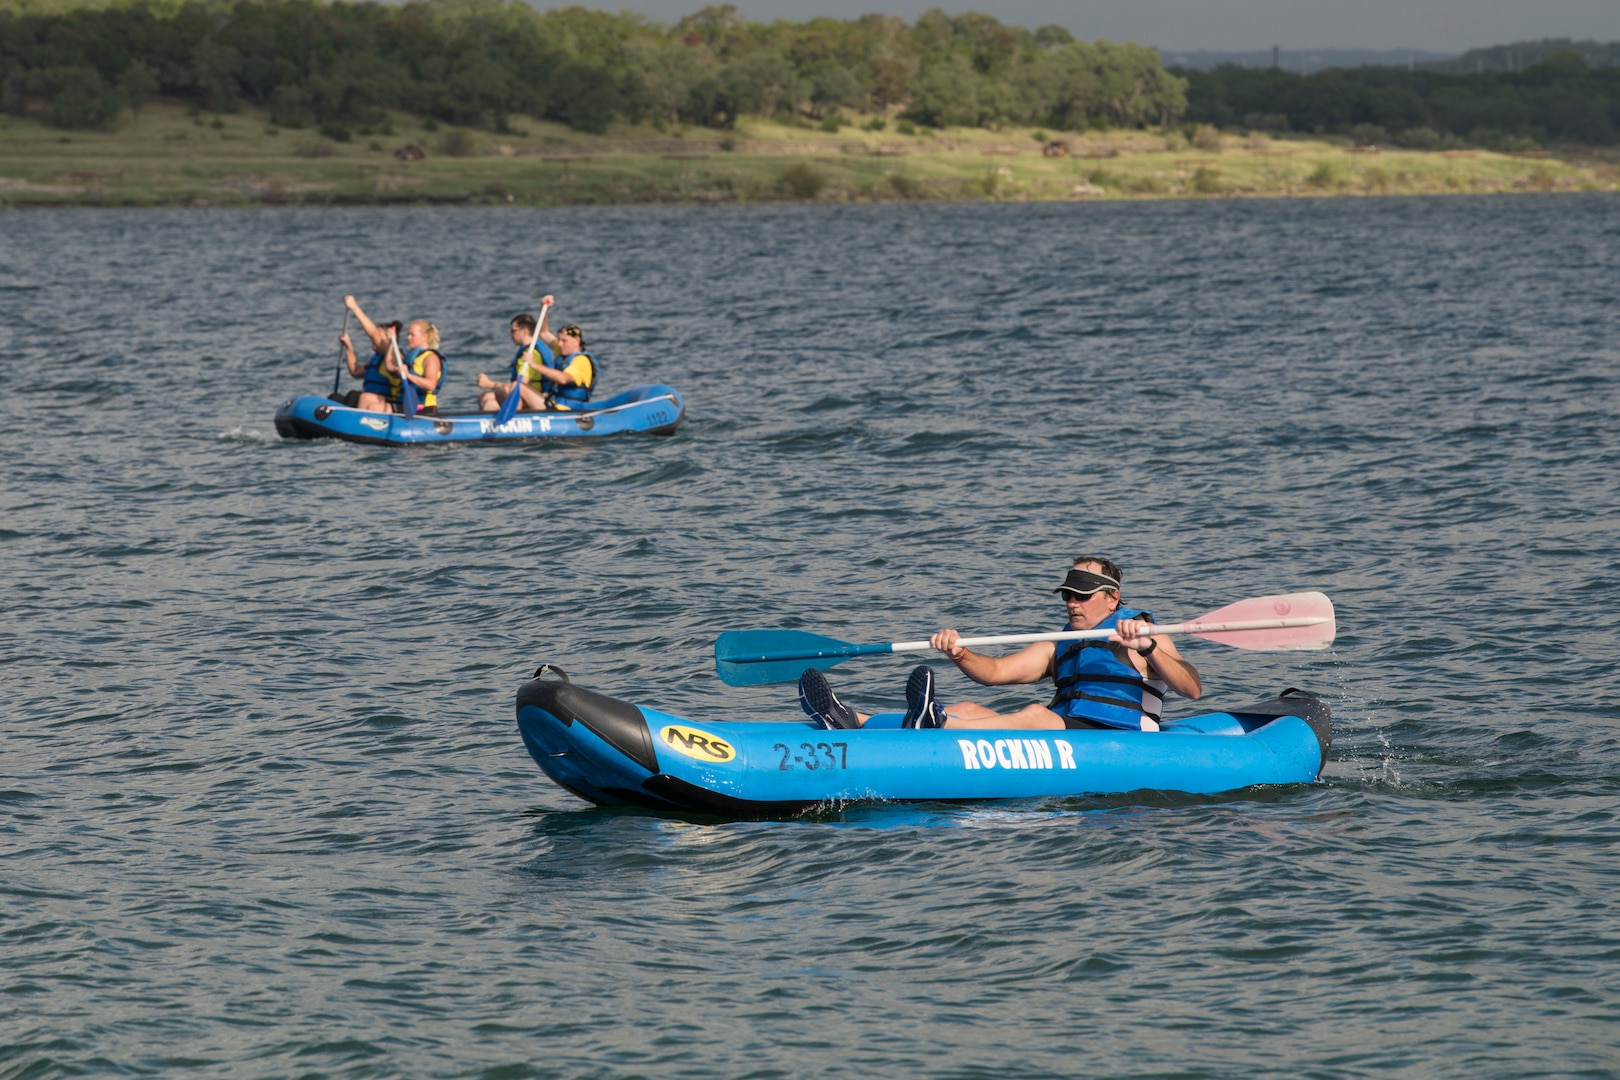 Participants in the Rambler 120 raft two miles as part of the triathlon Oct. 13, 2018, at Joint Base San Antonio Recreation Area at Canyon Lake, Texas.